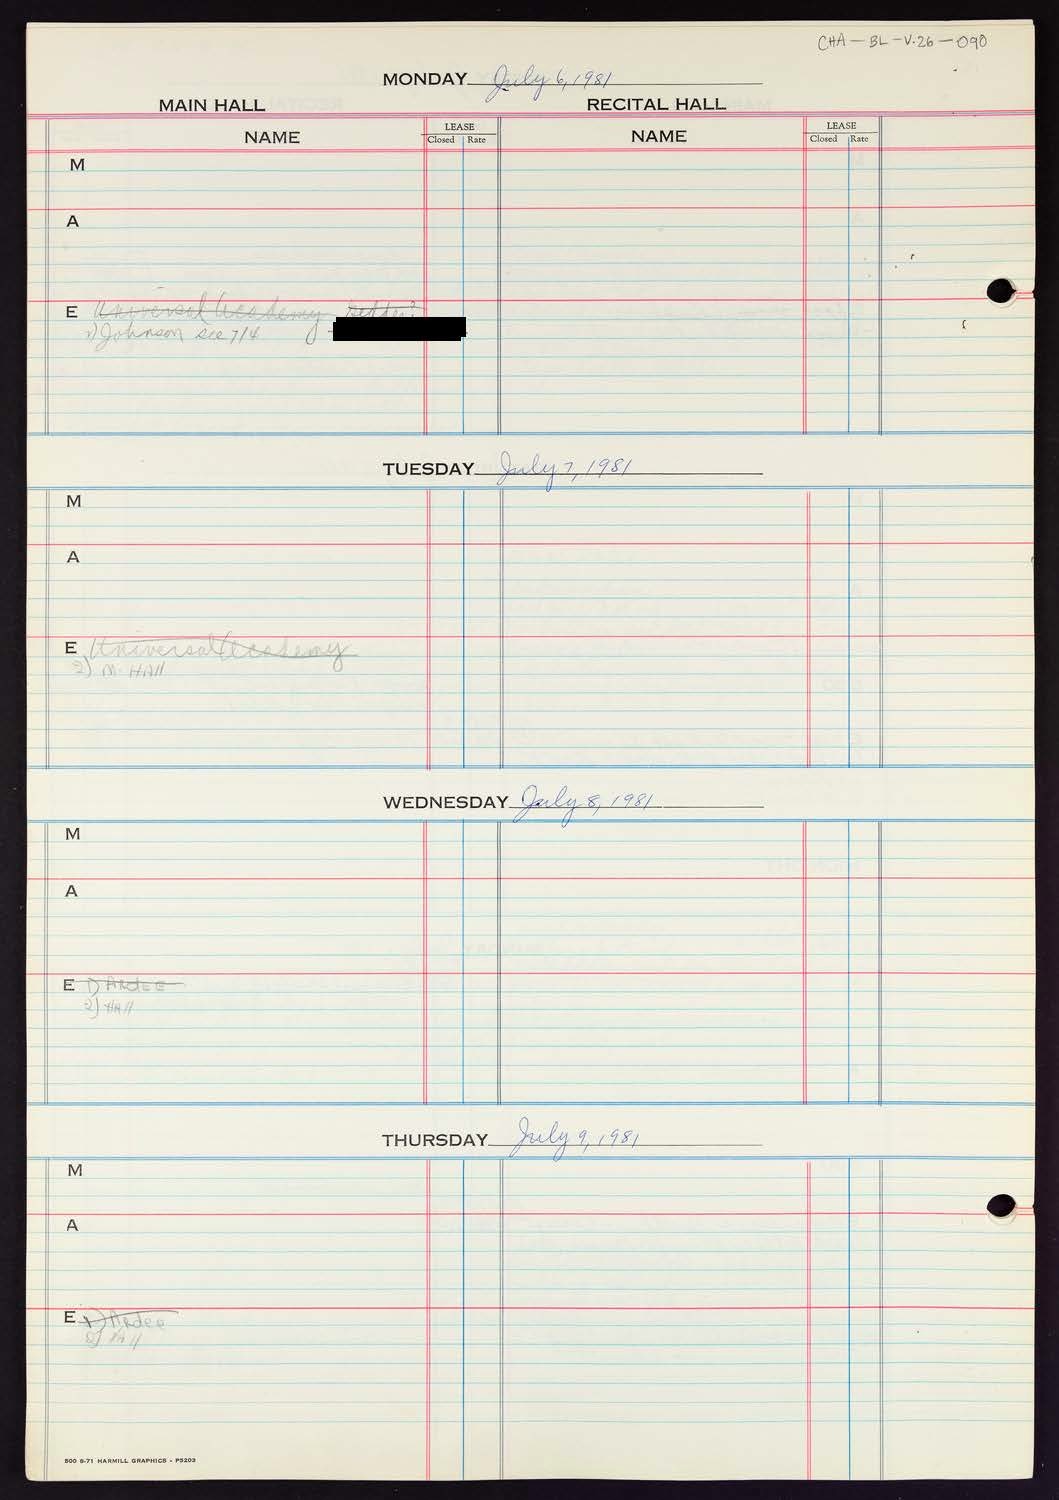 Carnegie Hall Booking Ledger, volume 26, page 90